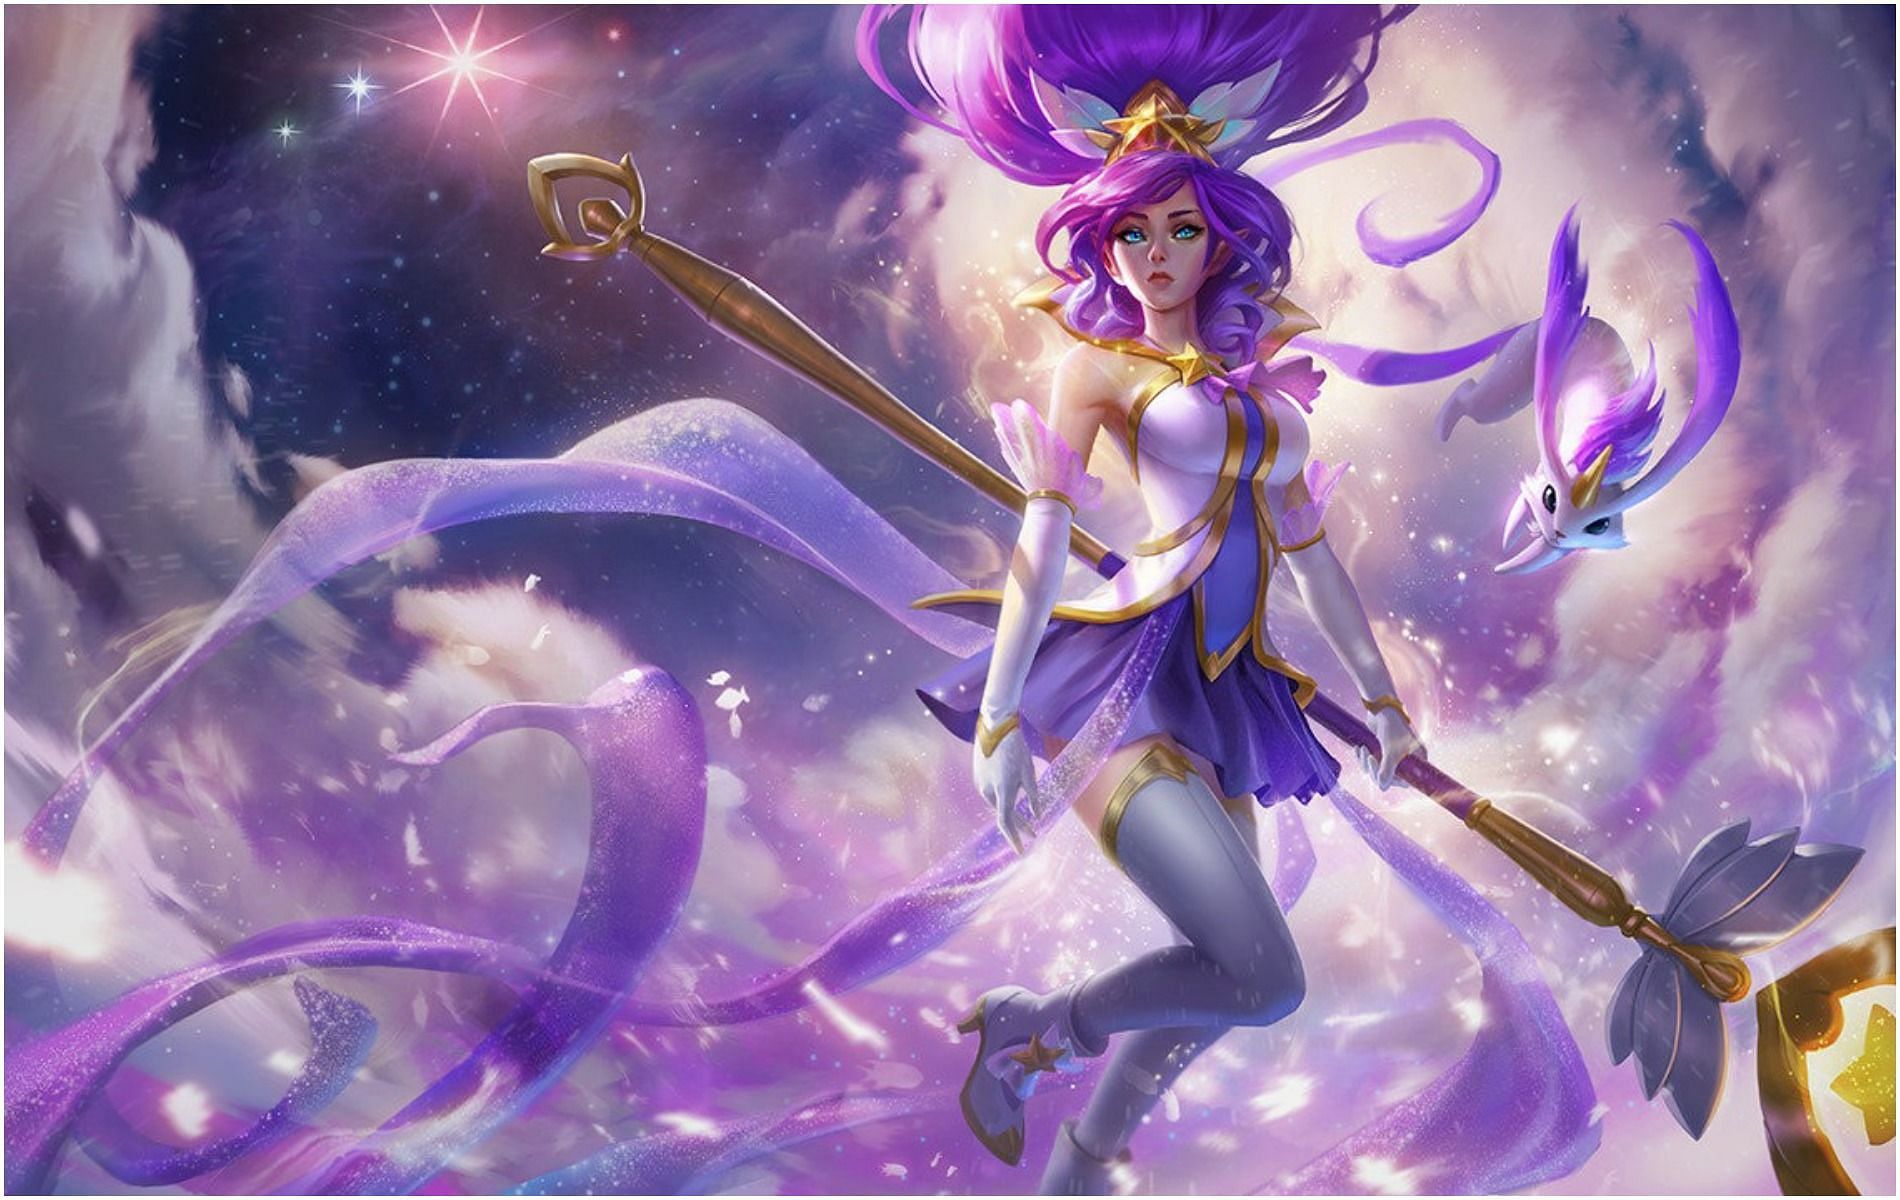 Janna has the highest win rate out of all the top lane champions in League of Legends (Image via Riot Games)